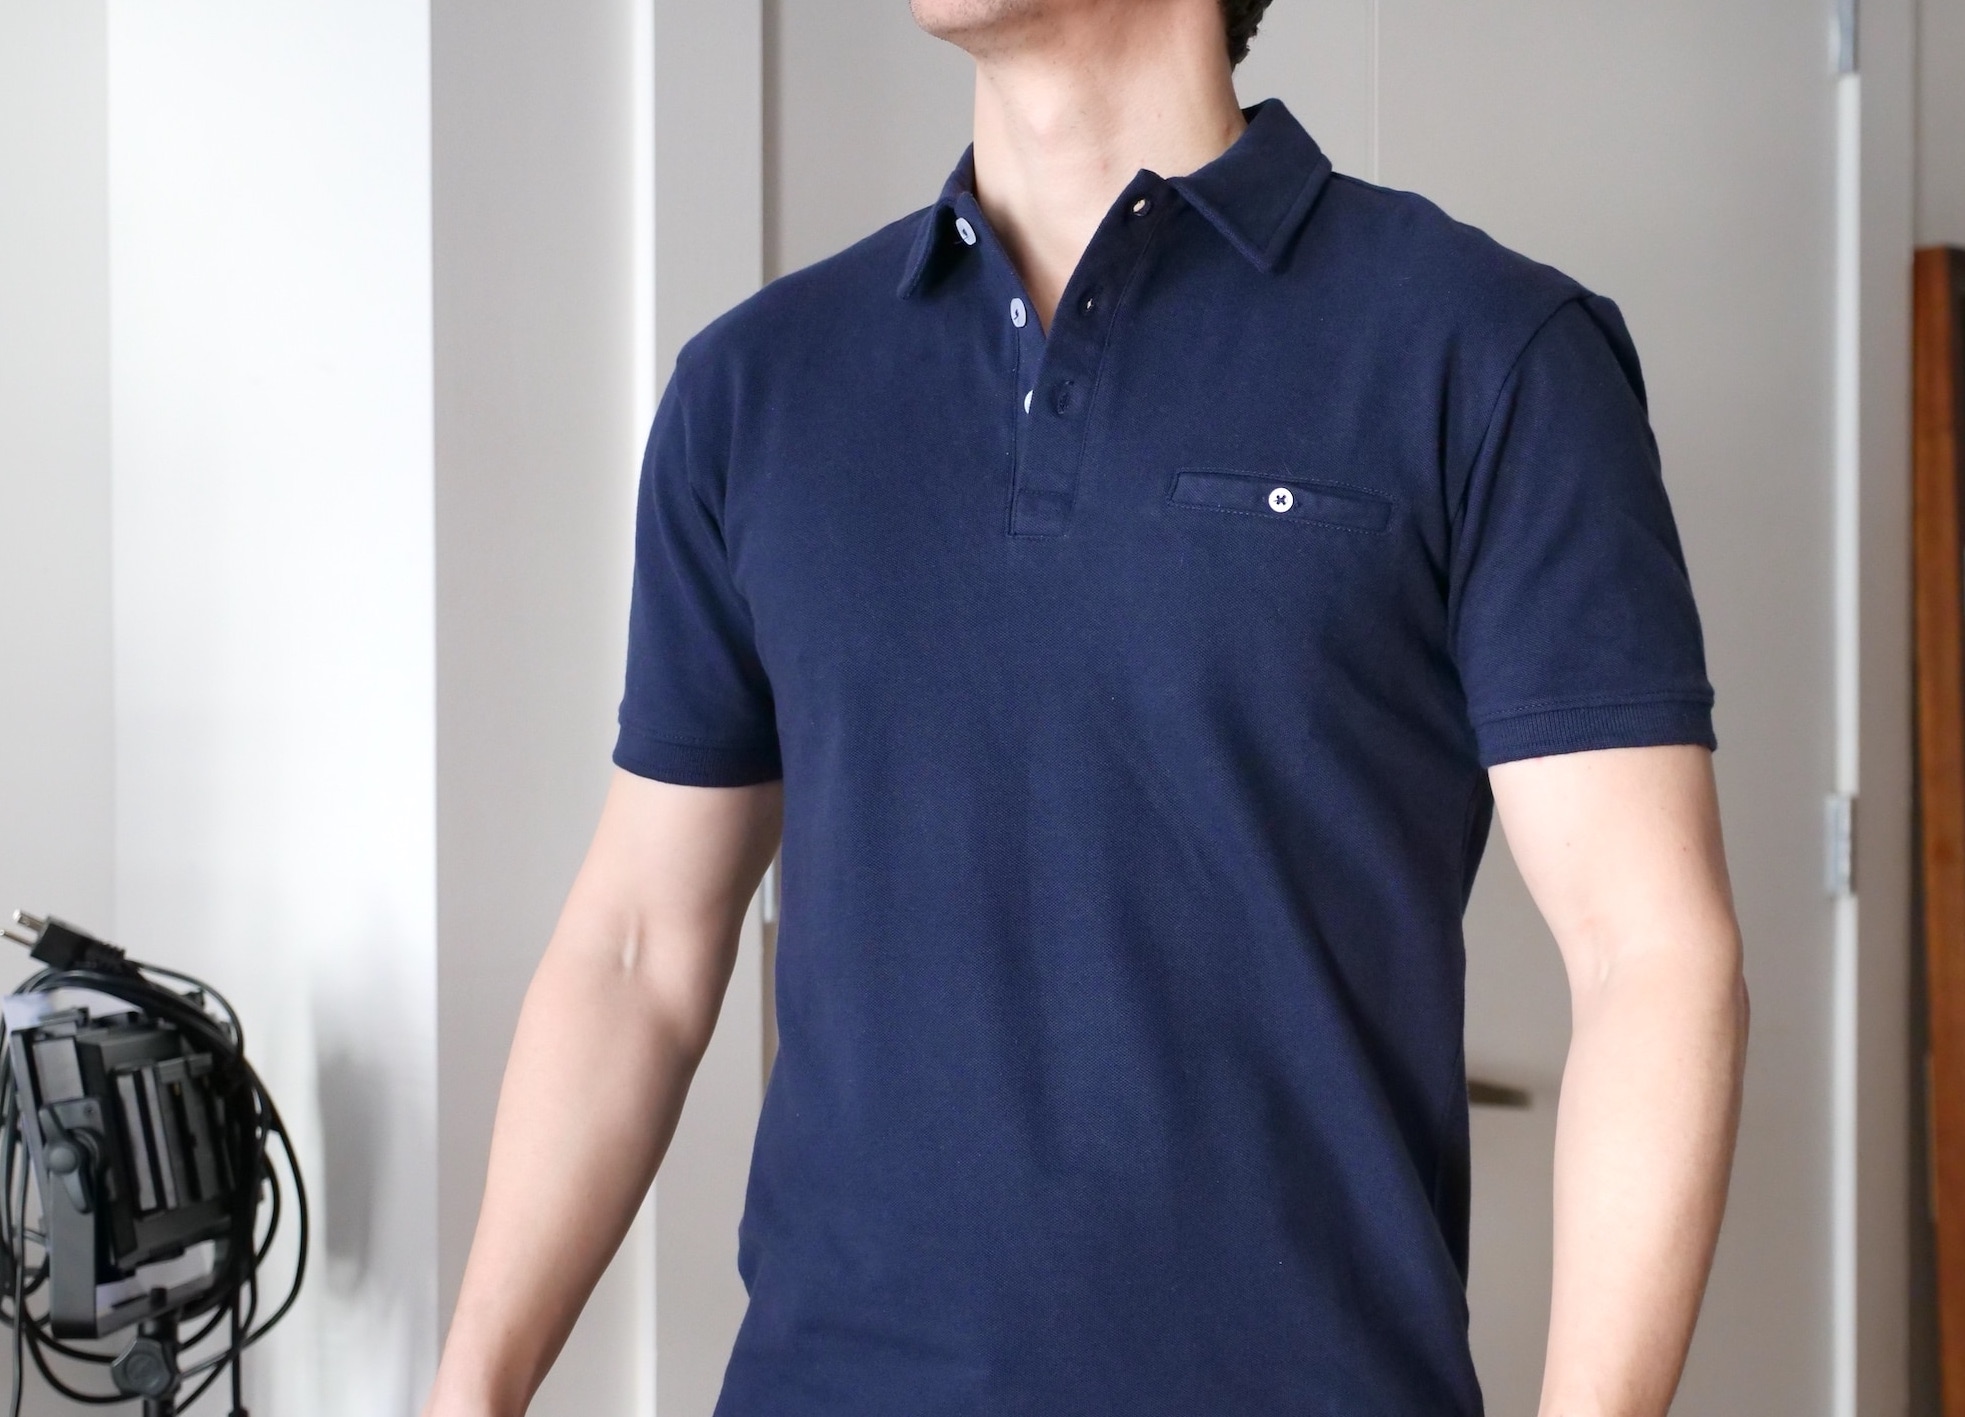 I hated wearing polos because my mom always talked about how nice this other person's son looked wearing polos.
<br>
<br>
I now wear polos to work every day because it's the easiest way to dress business casual. They're pretty much just fancy T-shirts. -Dances28